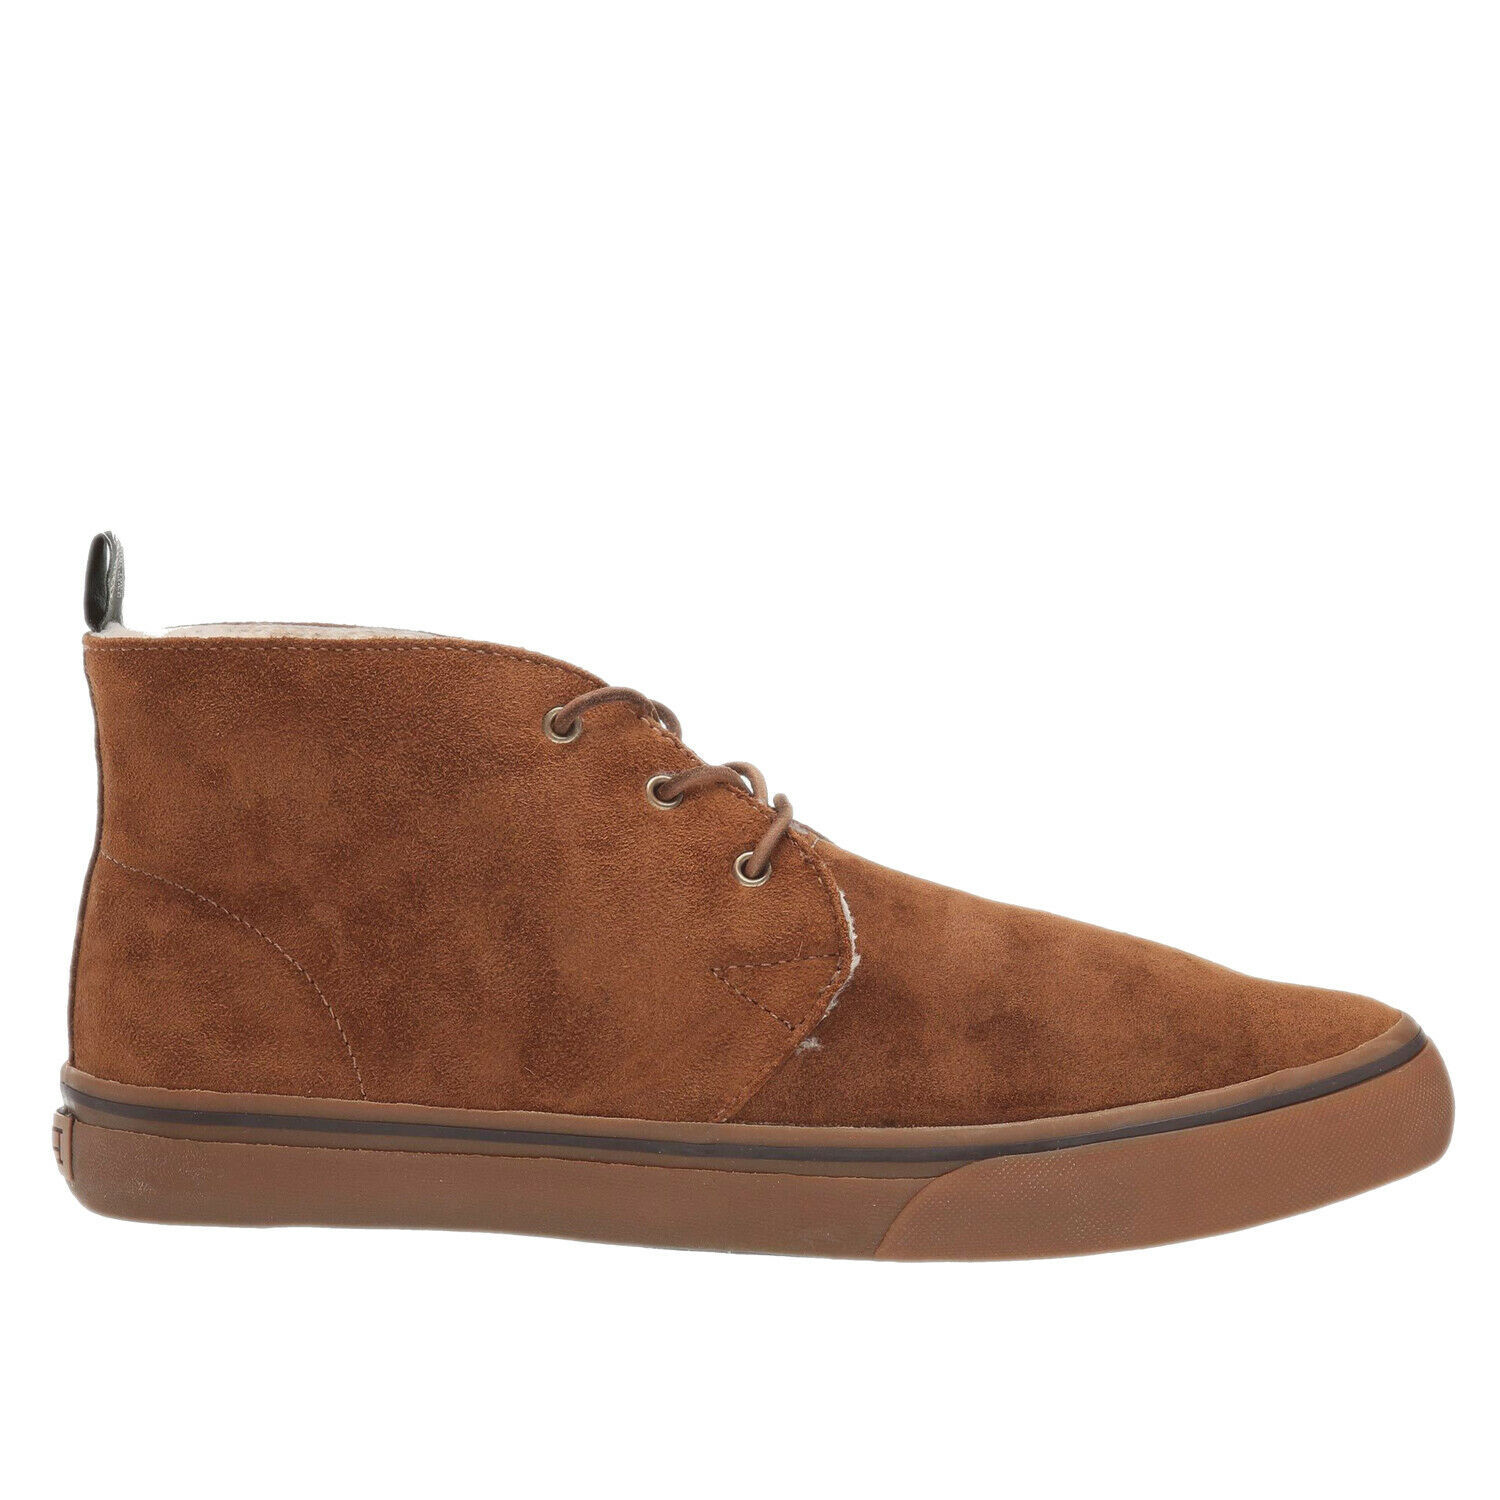 Polo Ralph Lauren Mens Tyson Chukka Sneaker Boot Brown Leather Suede US ...